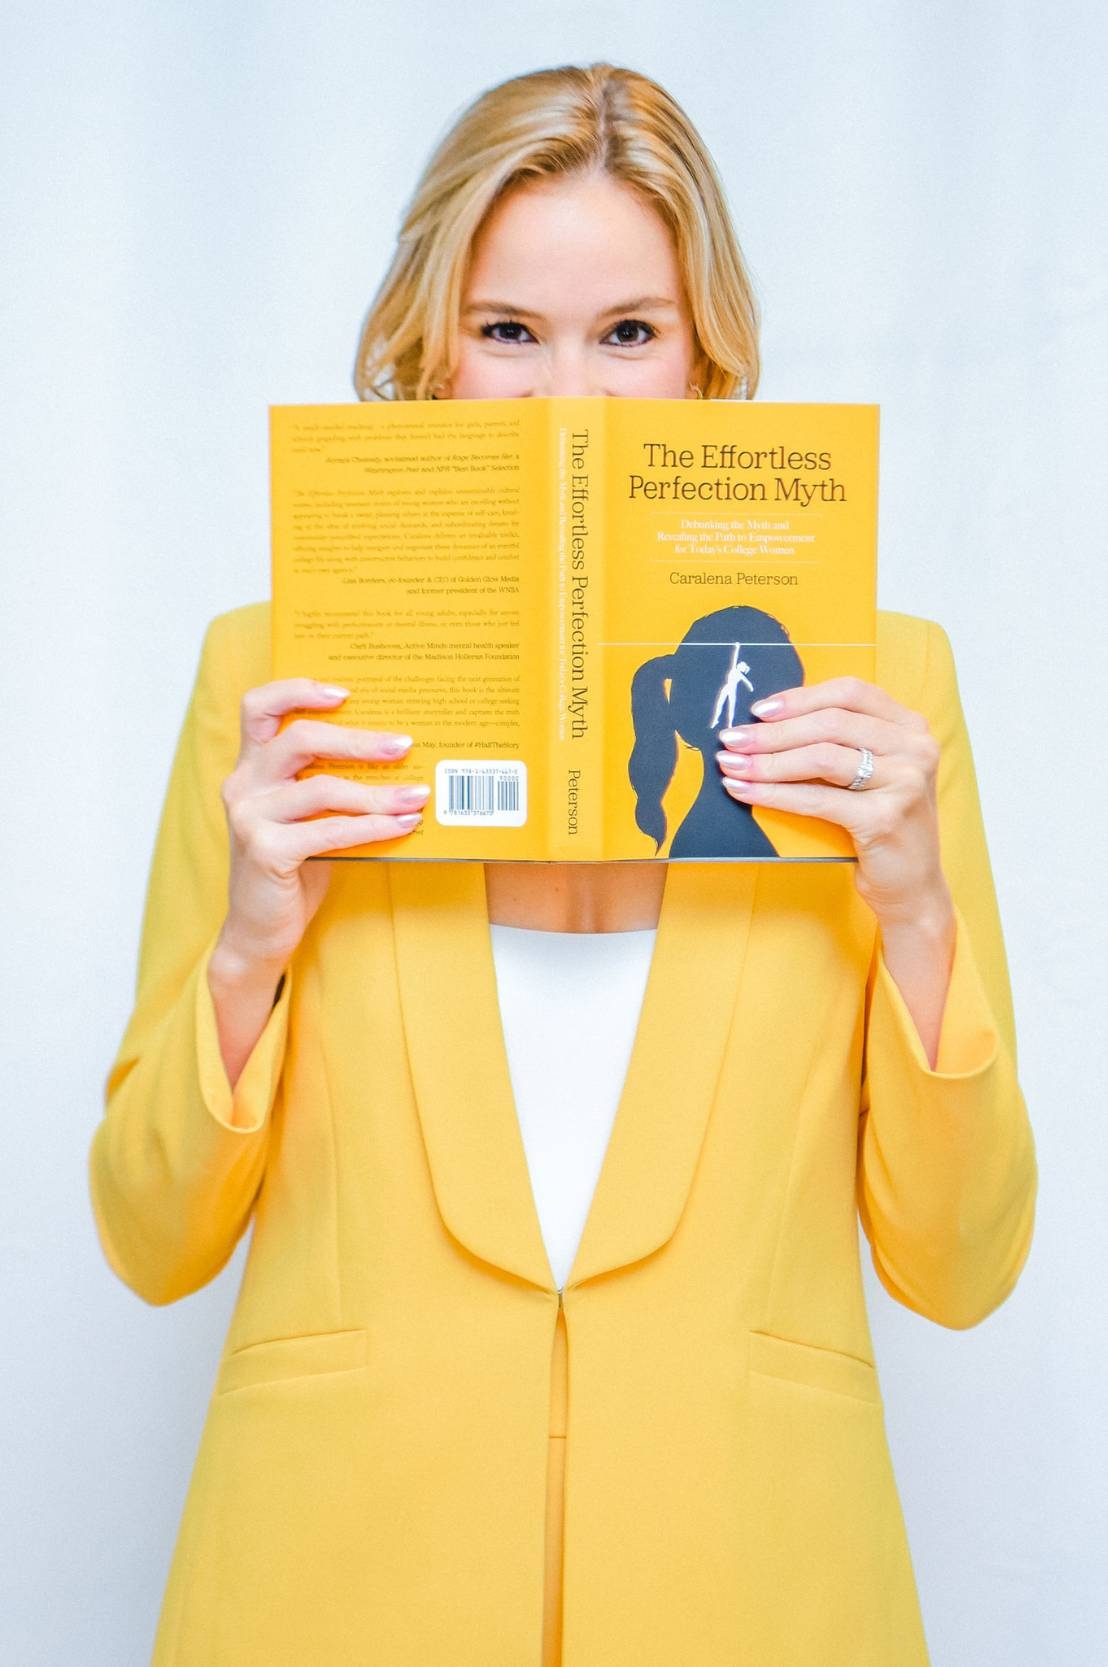 A woman with blond hair wearing a bright yellow suit and white jacket holds an open book in front of her face, the book jacket color matching the yellow of her suit. Her eyes appear to be smiling.